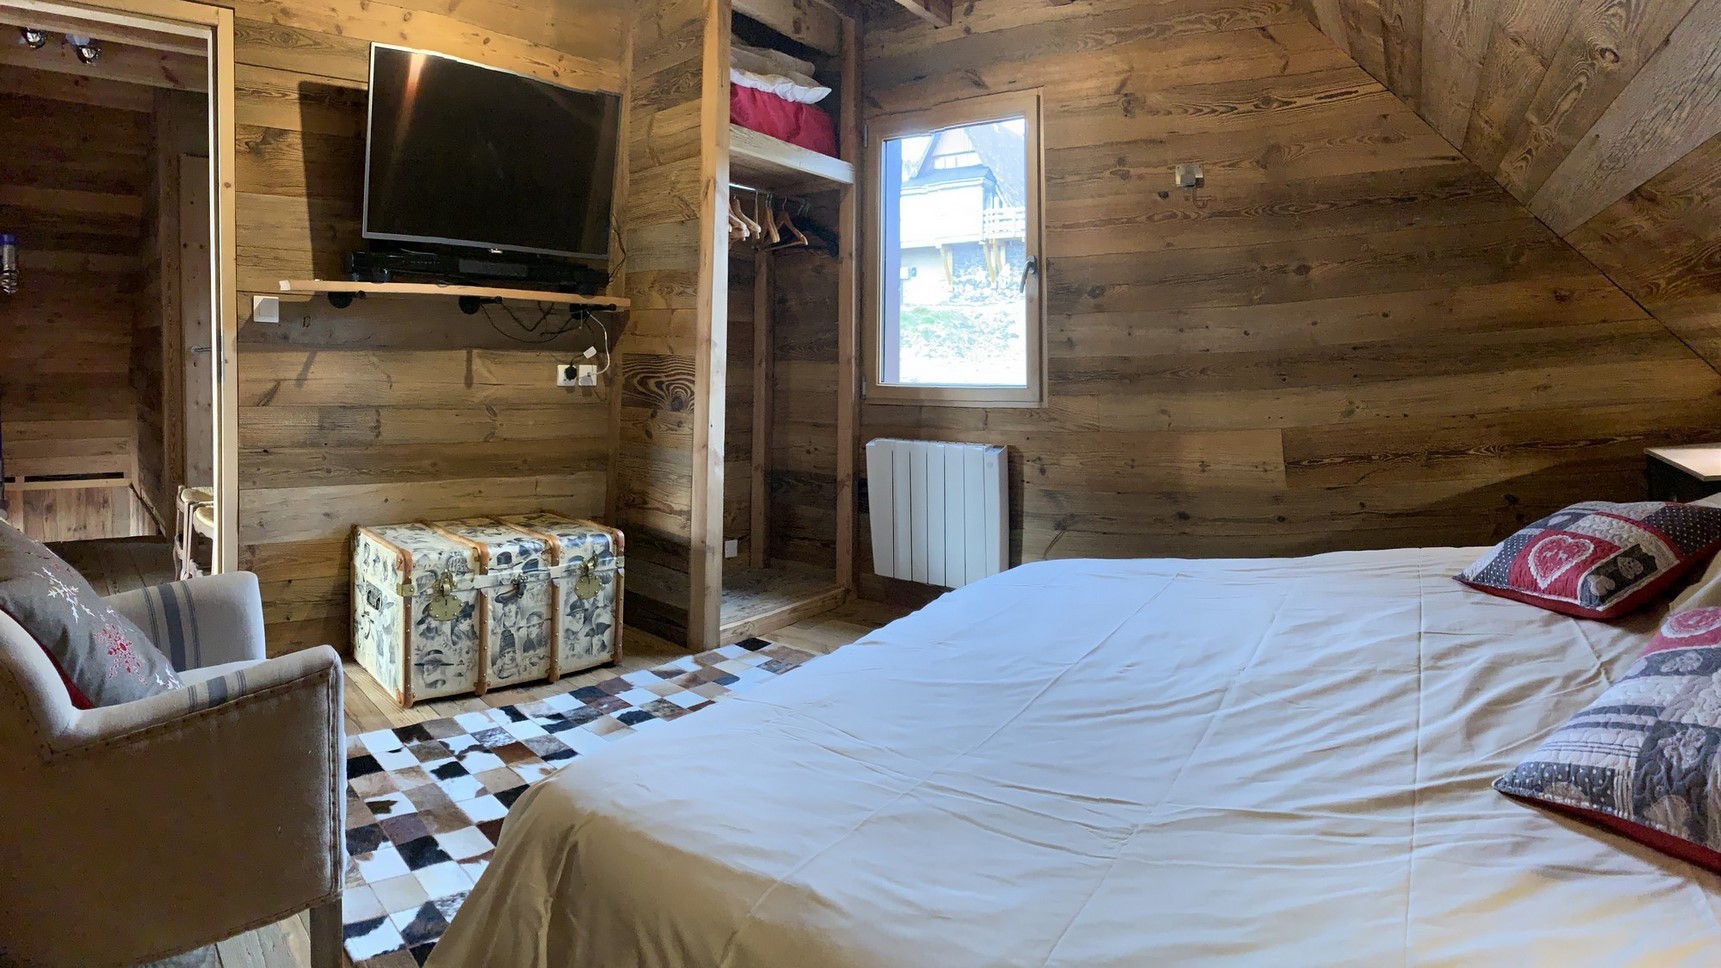 Chalet l'Anorak, Tyrolean bedroom, King Size bed, trunk and storage